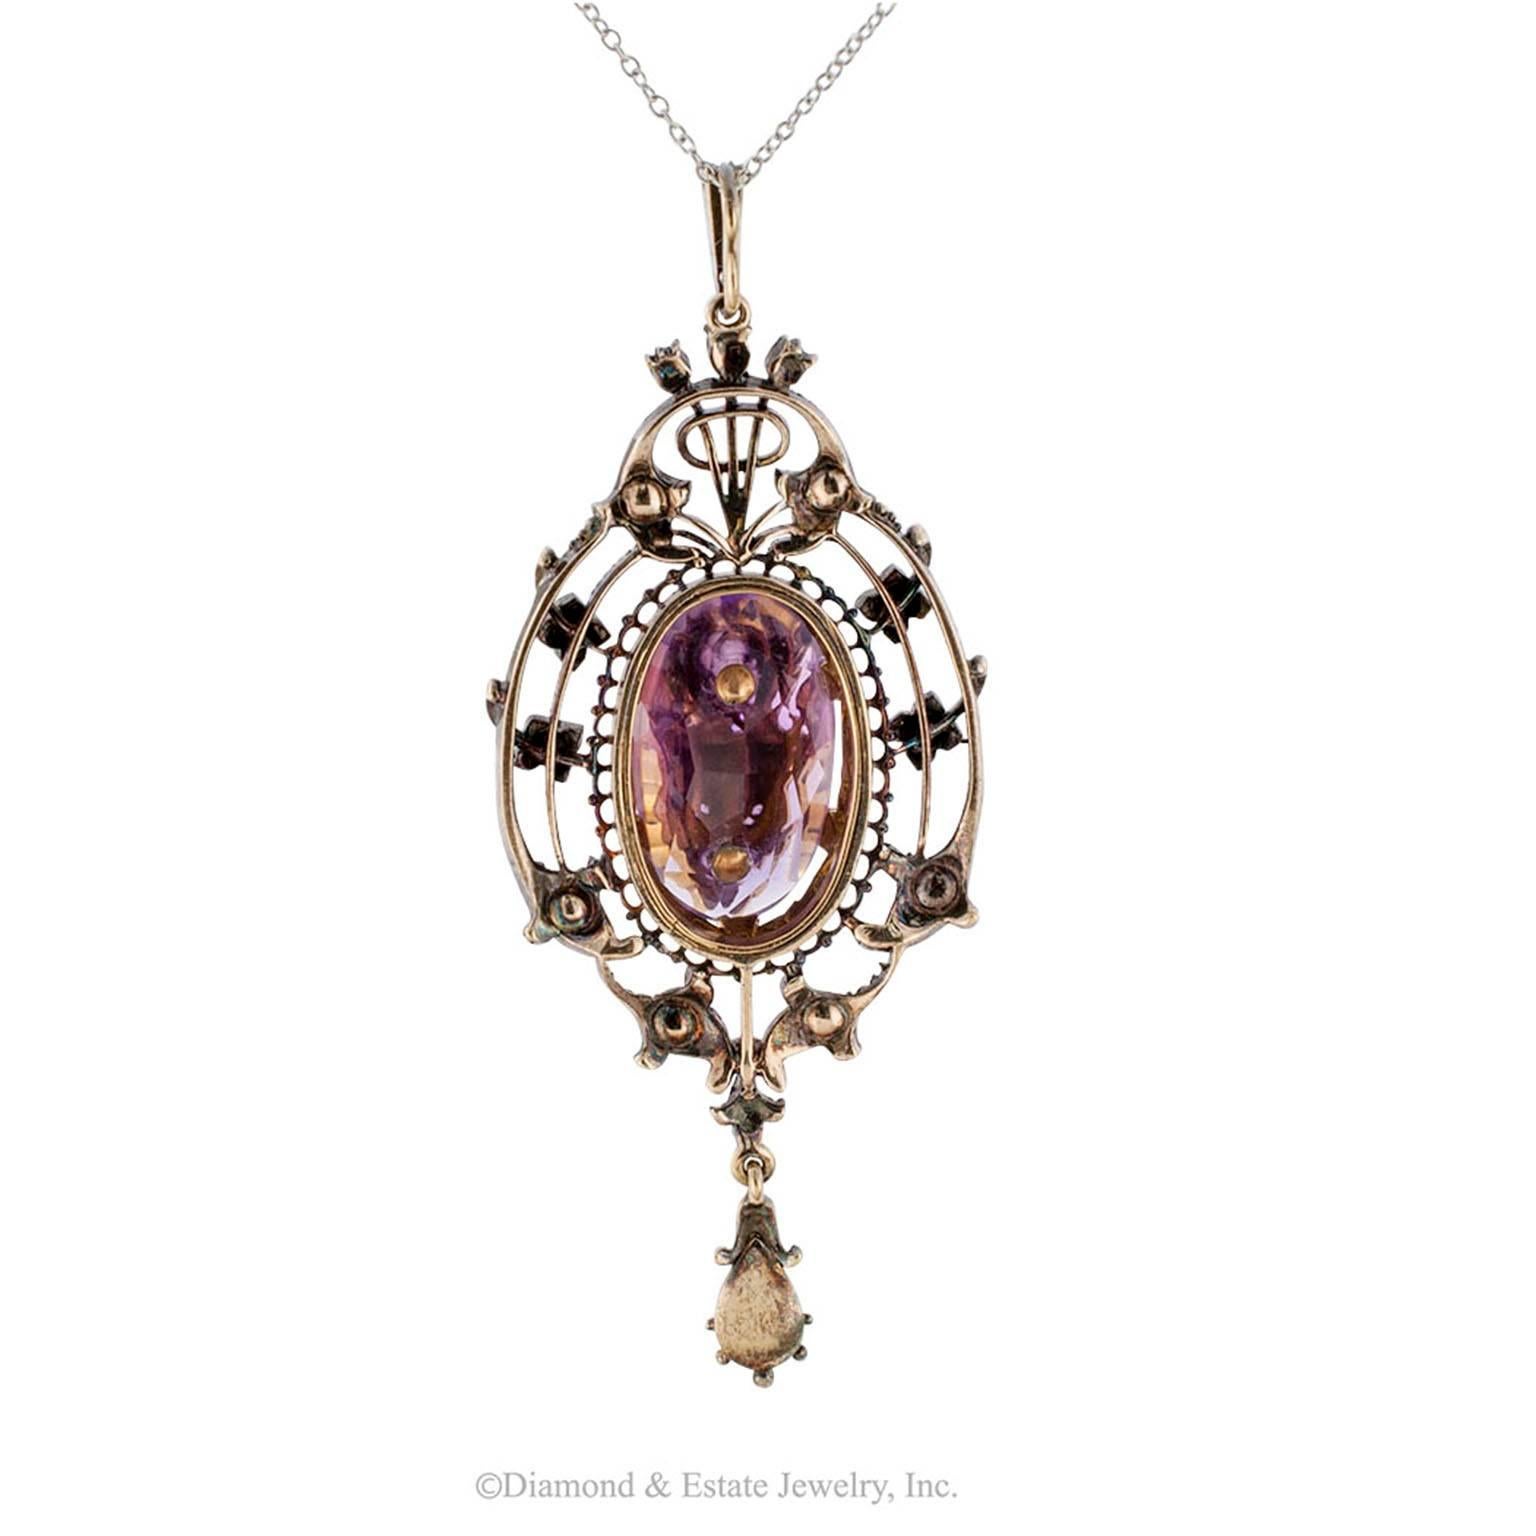 Victorian 1850s Amethyst Pearl Diamond Gold Silver Pendant

Victorian 1850s amethyst diamond and pearl pendant mounted in silver and gold.  This is high voltage, early Victorian romanticism artfully arranged into a lovely design that holds no bars